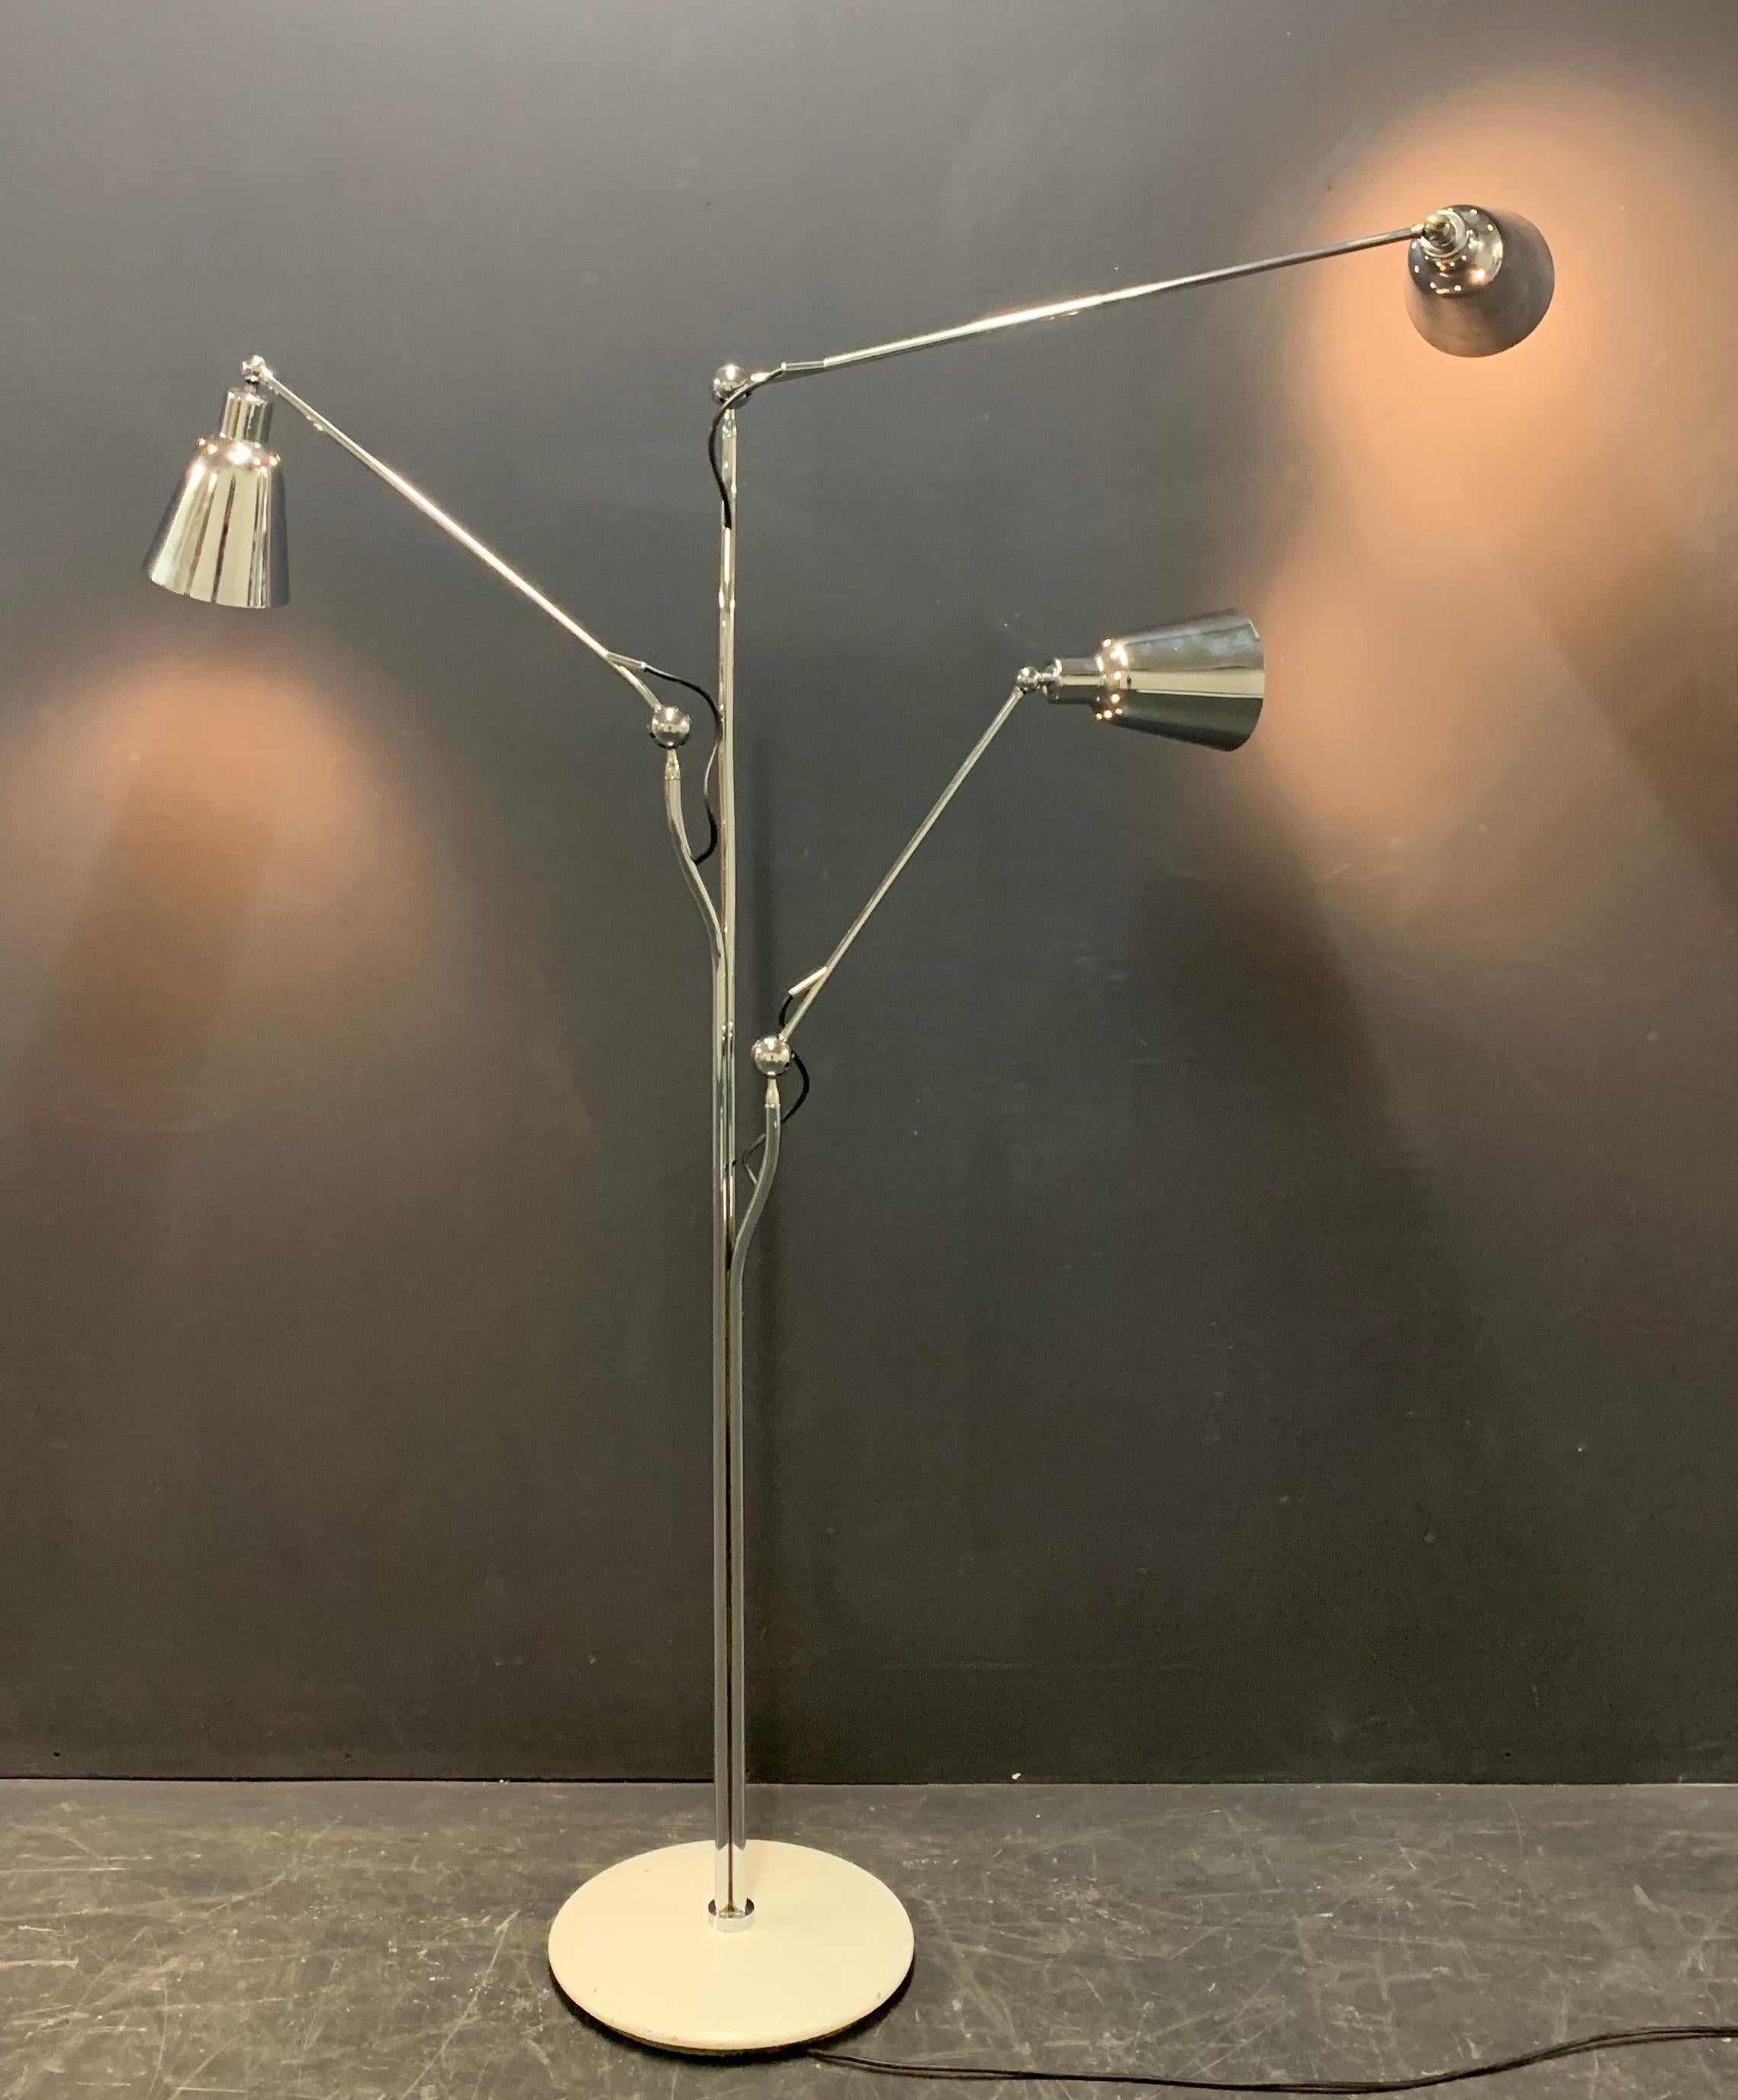 The only known chrome version of this outstanding rare and amazing floor lamp by Angelo Lelli. Made on custom order and unique. Only a handful of these lamps have shown up over the last 20-30 years, but only this one is made of chromed brass. An